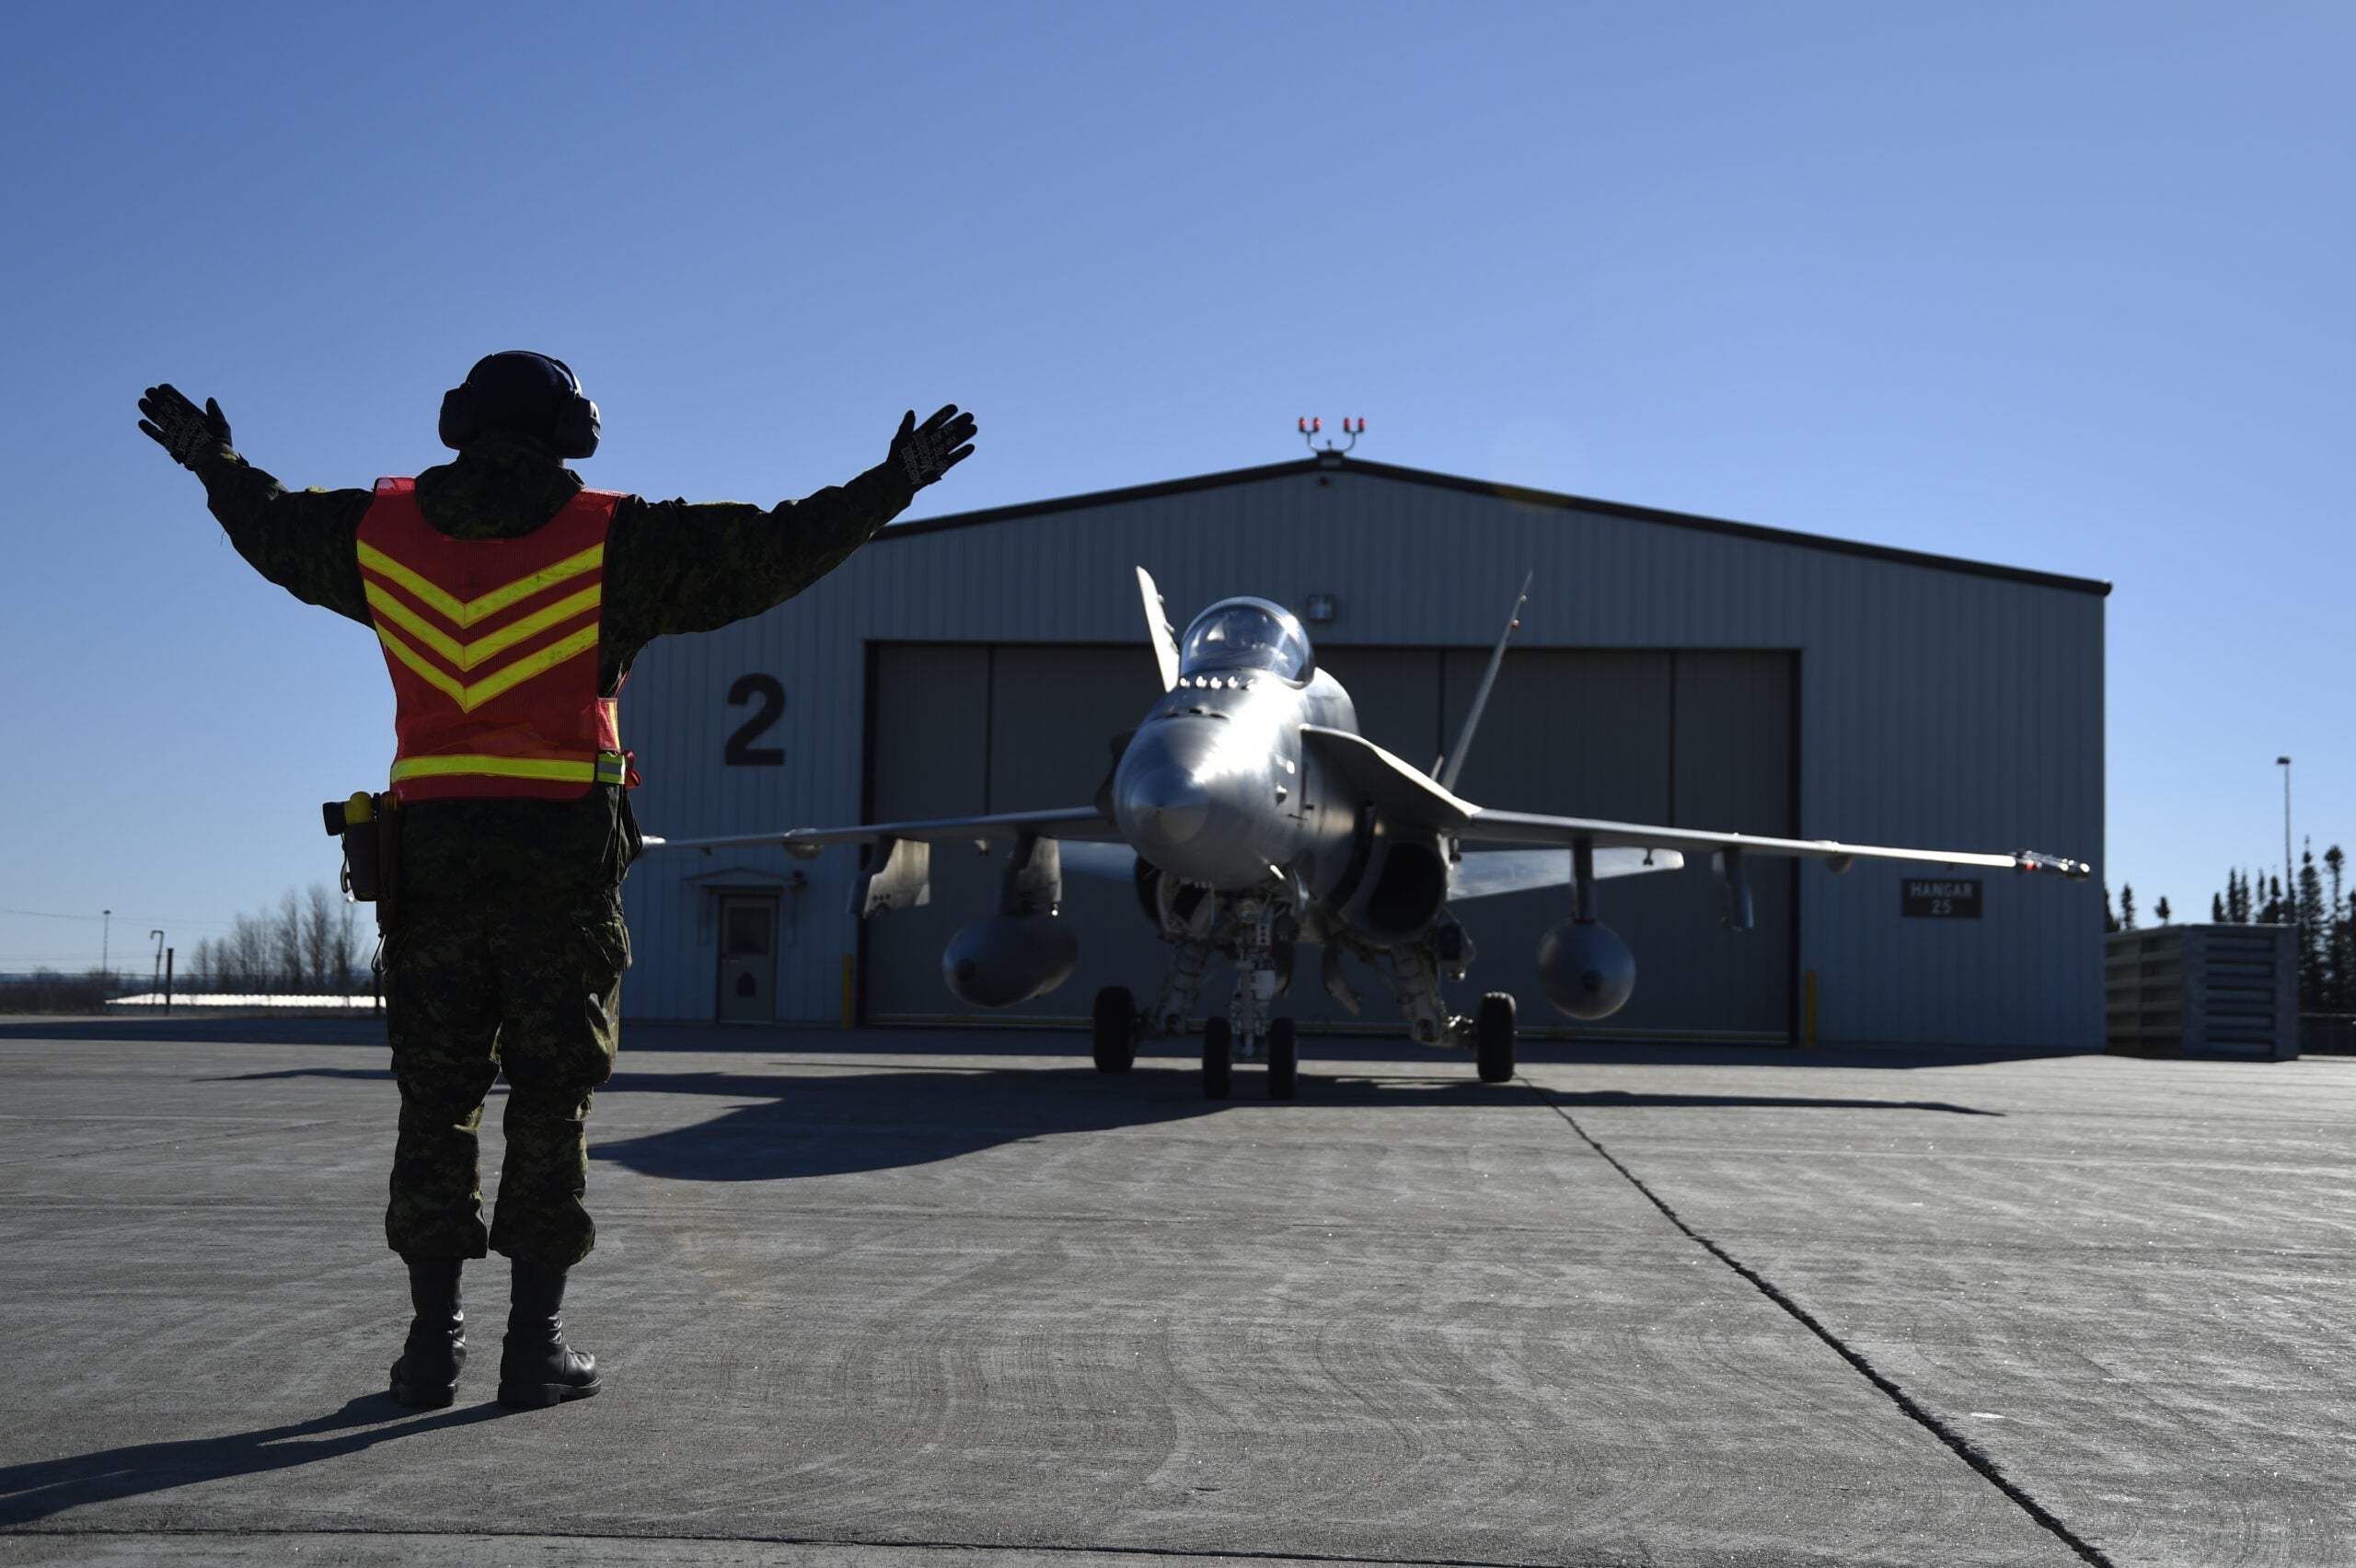 Royal Canadian Air Force Cpl. Charles Milot, 425 Tactical Fighter Squadron engine technician, marshals a CF-18 Hornet during Vigilant Shield 15 at 5 Wing Goose Bay, Newfoundland and Labrador, Canada, Oct. 23, 2014. Vigilant Shield field training exercise is a bi-national NORAD Command exercise which provides realistic training and practice for American and Canadian forces in support of respective national strategy for North America’s defense. NORAD ensures U.S. and Canadian air sovereignty through a network of alert fighters, tankers, airborne early warning aircraft, and ground-based air defense assets cued by interagency and defense surveillance radars. (U.S. Air Force photo/Senior Airman Justin Wright)